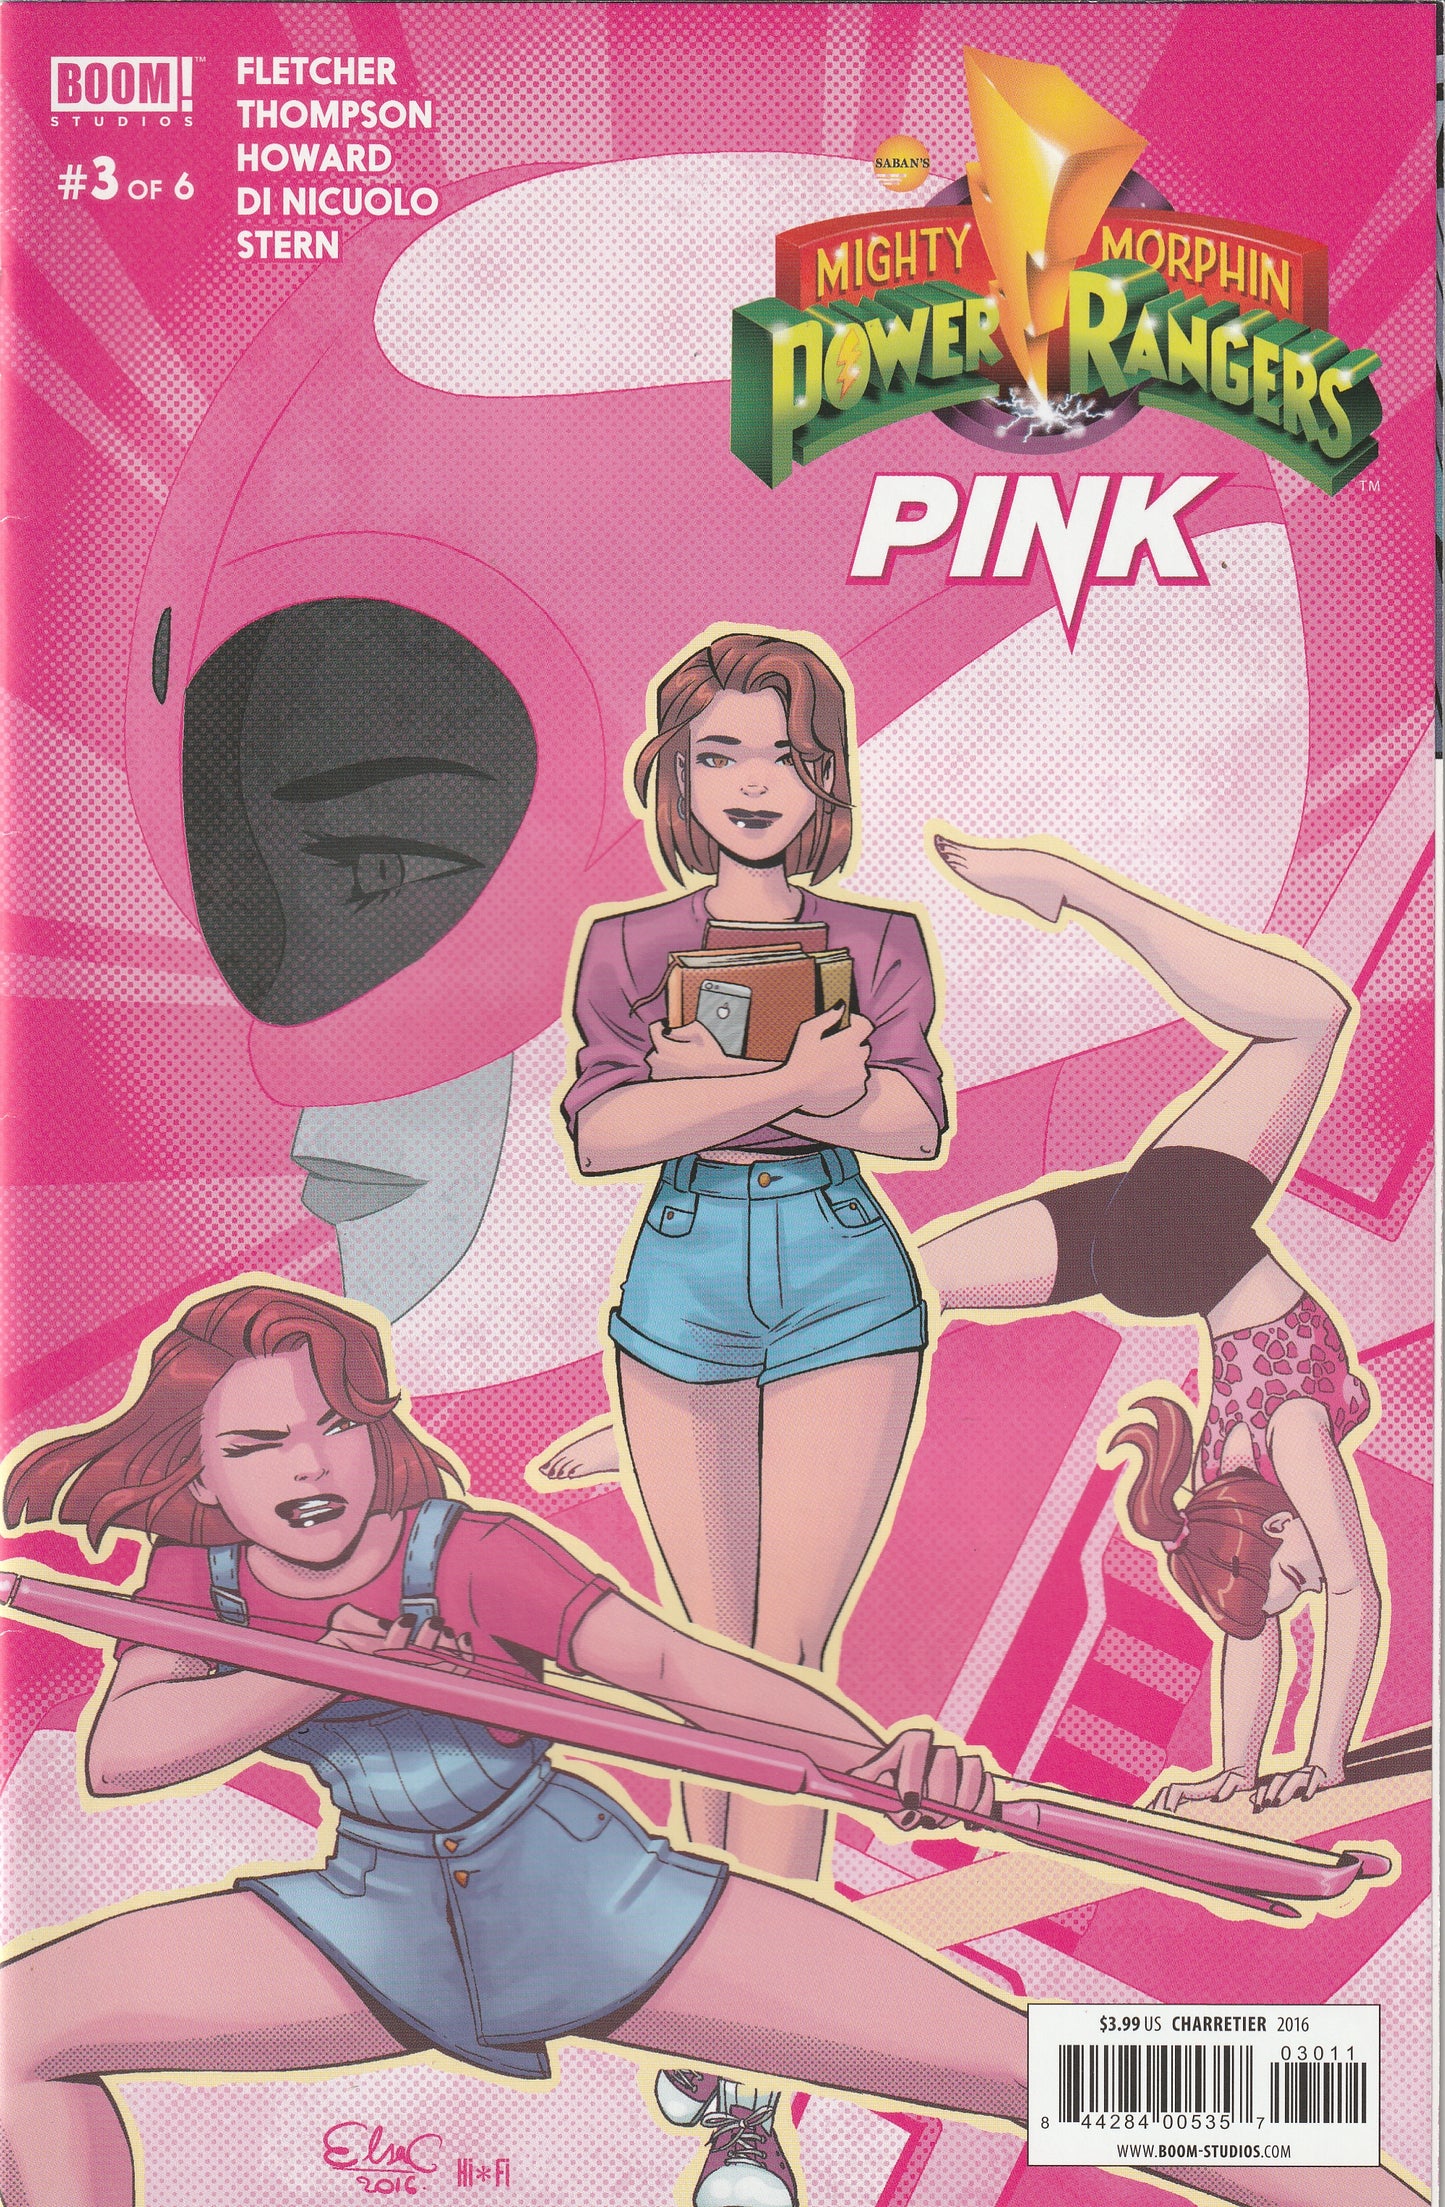 Mighty Morphin Power Rangers Pink #3 (of 6) (2016)